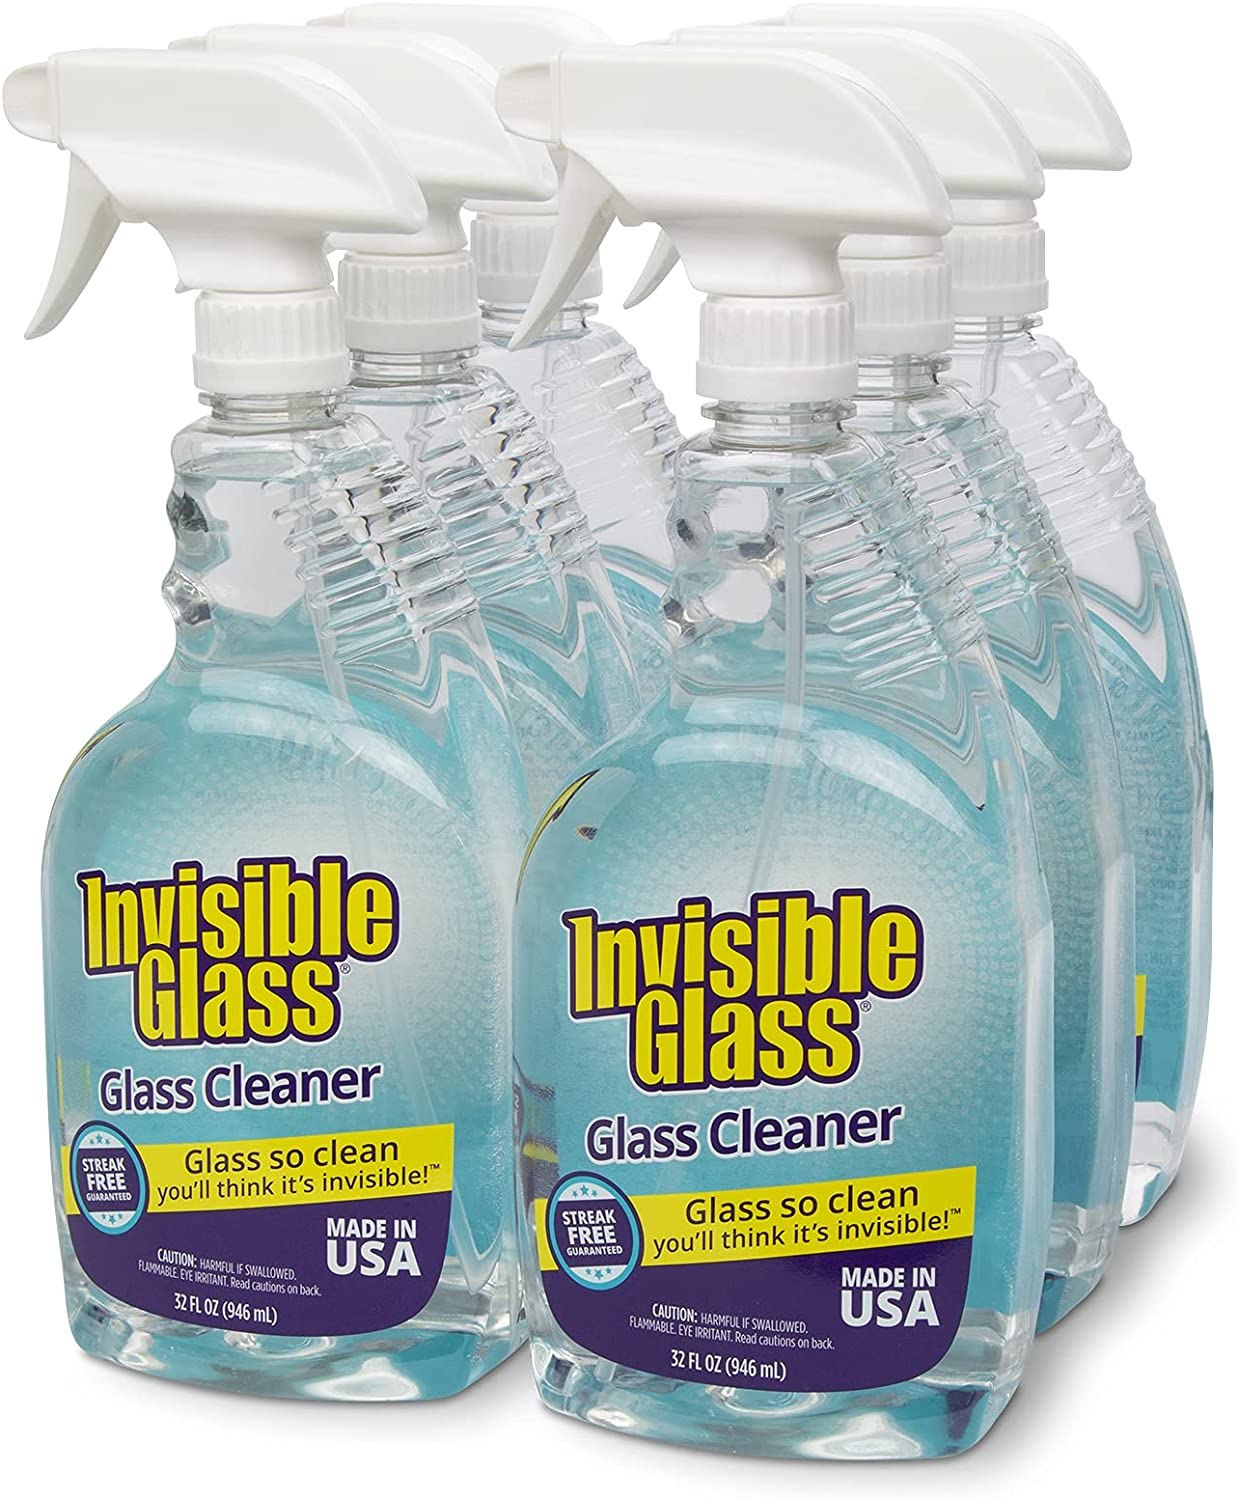 Who Makes The BEST Window / GLASS Cleaner?.It May Surprise You! 